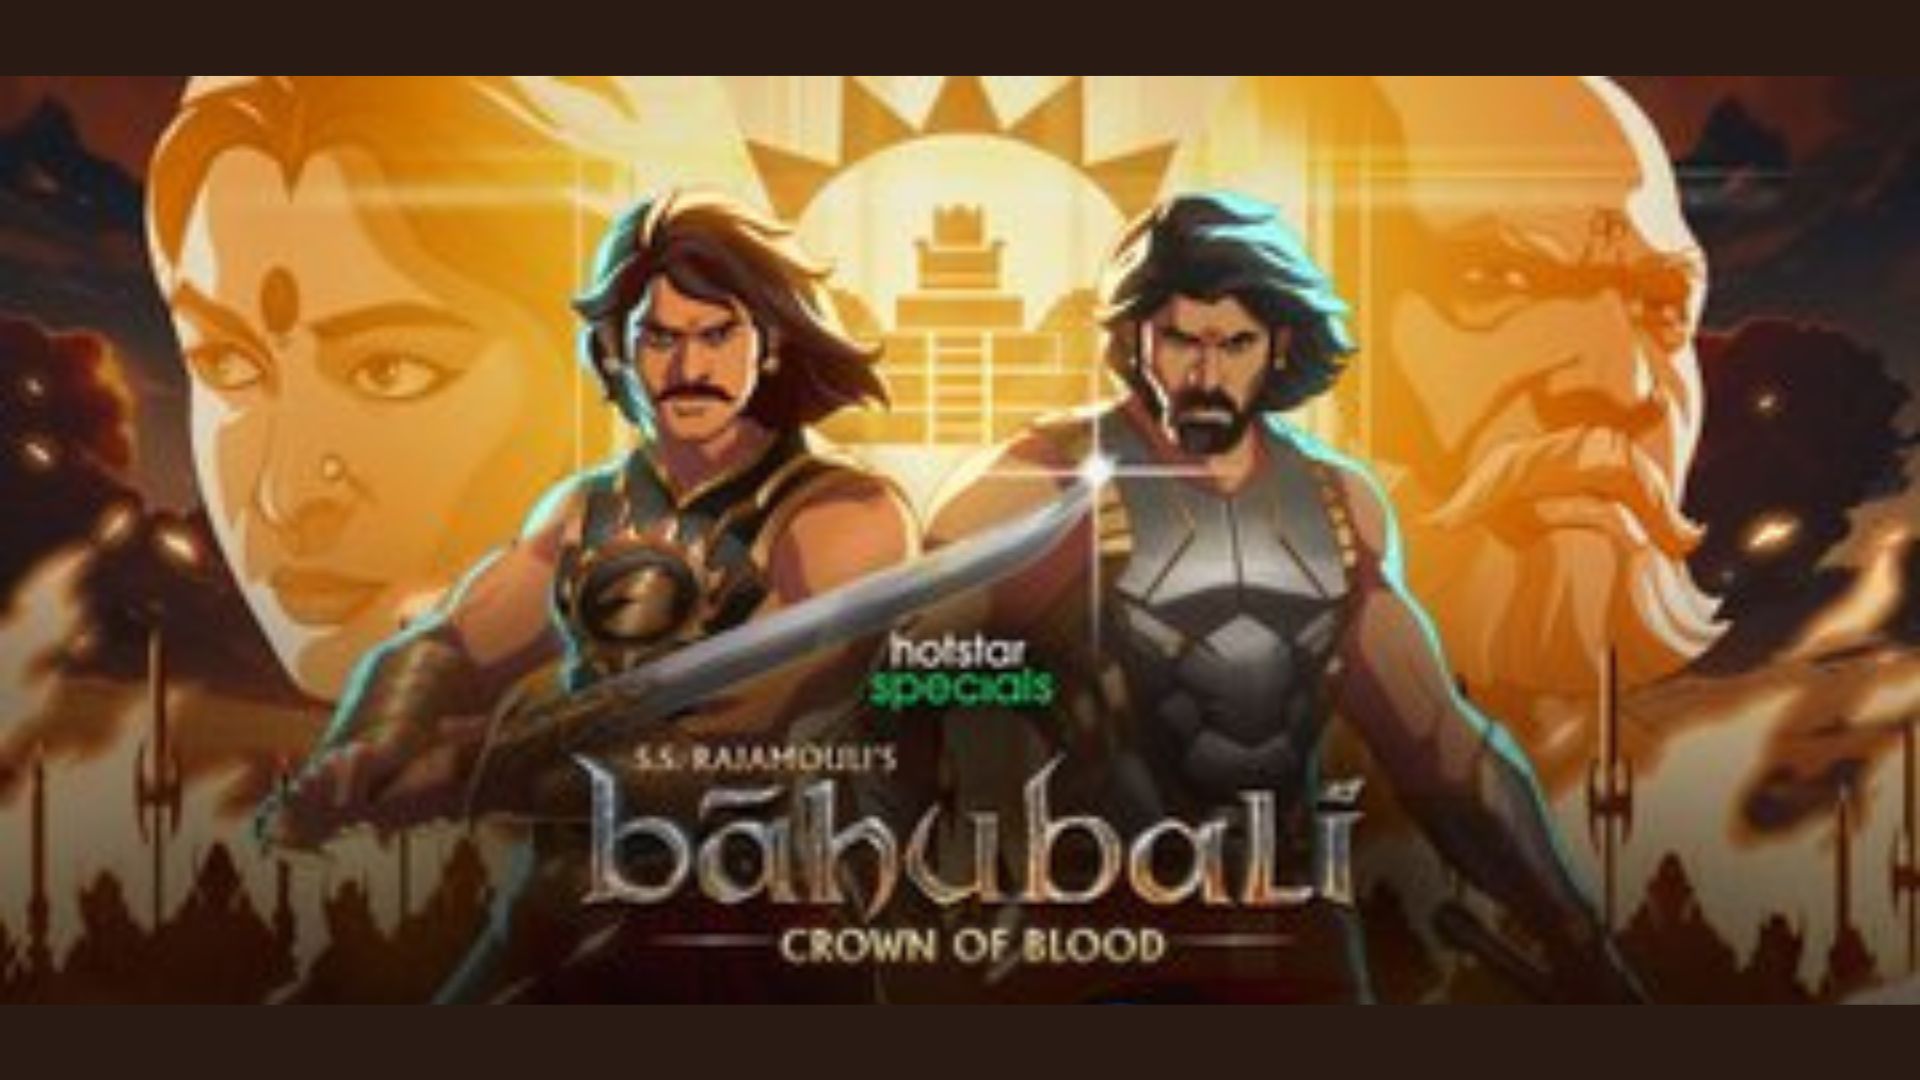 Baahubali: Crown of Blood animated series streaming on Disney from 17th May